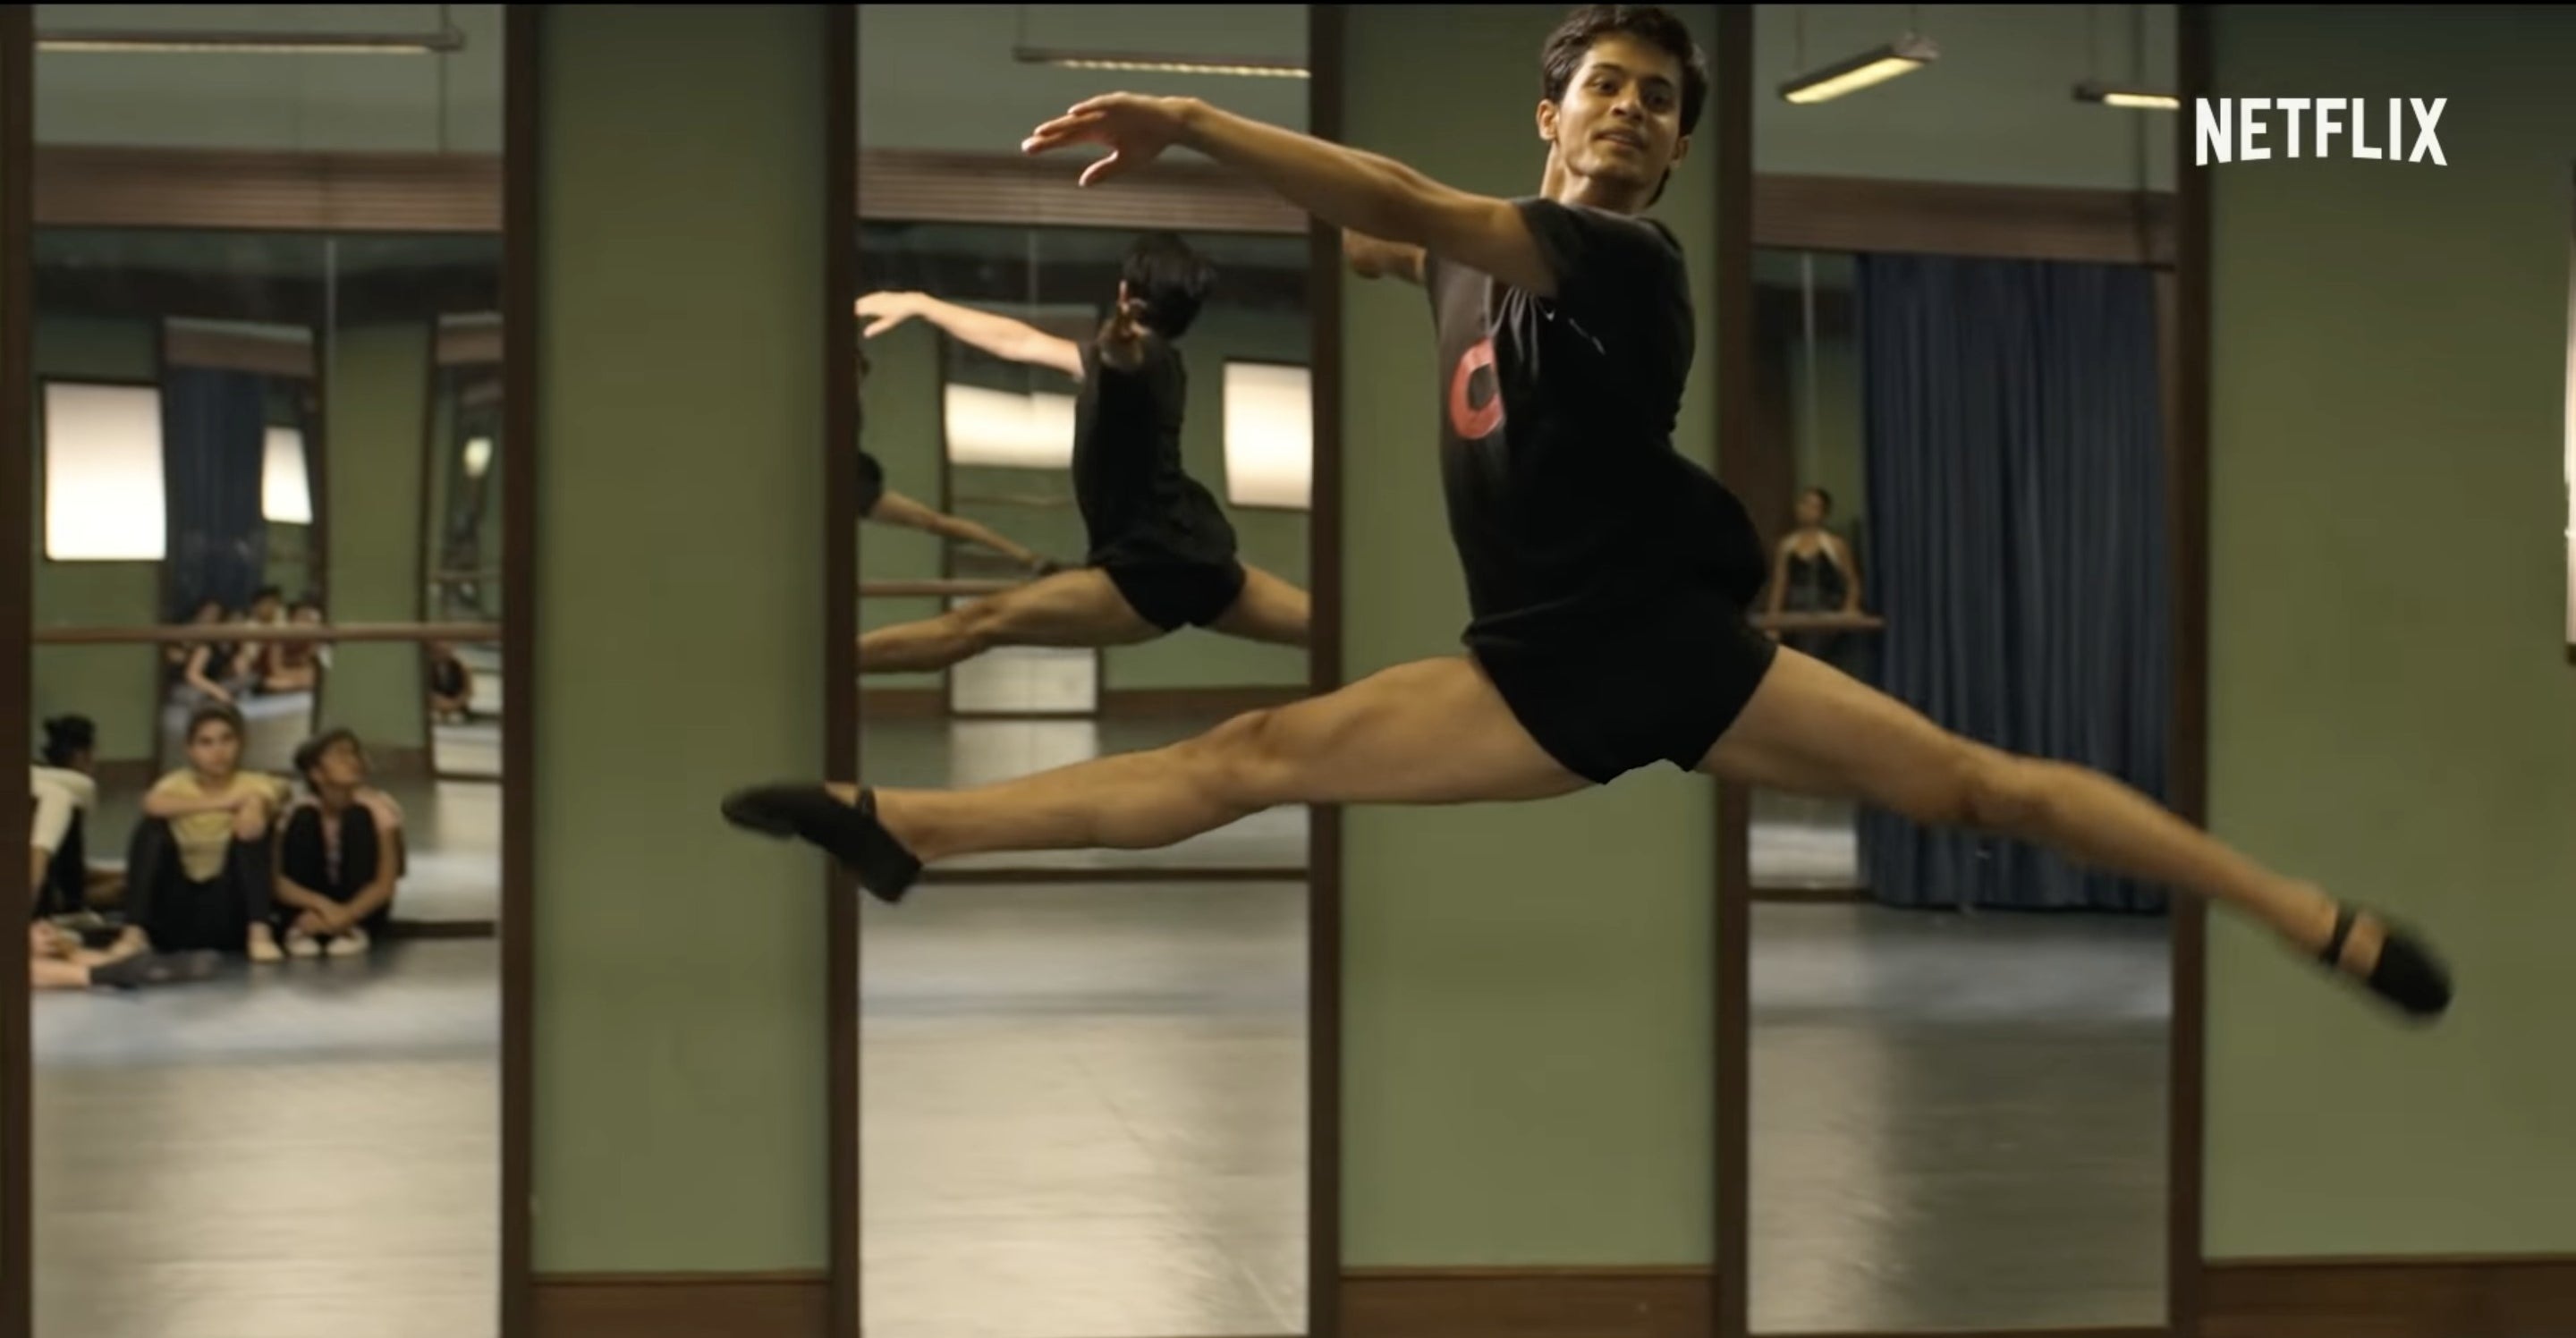 A boy performing ballet in a still from the movie